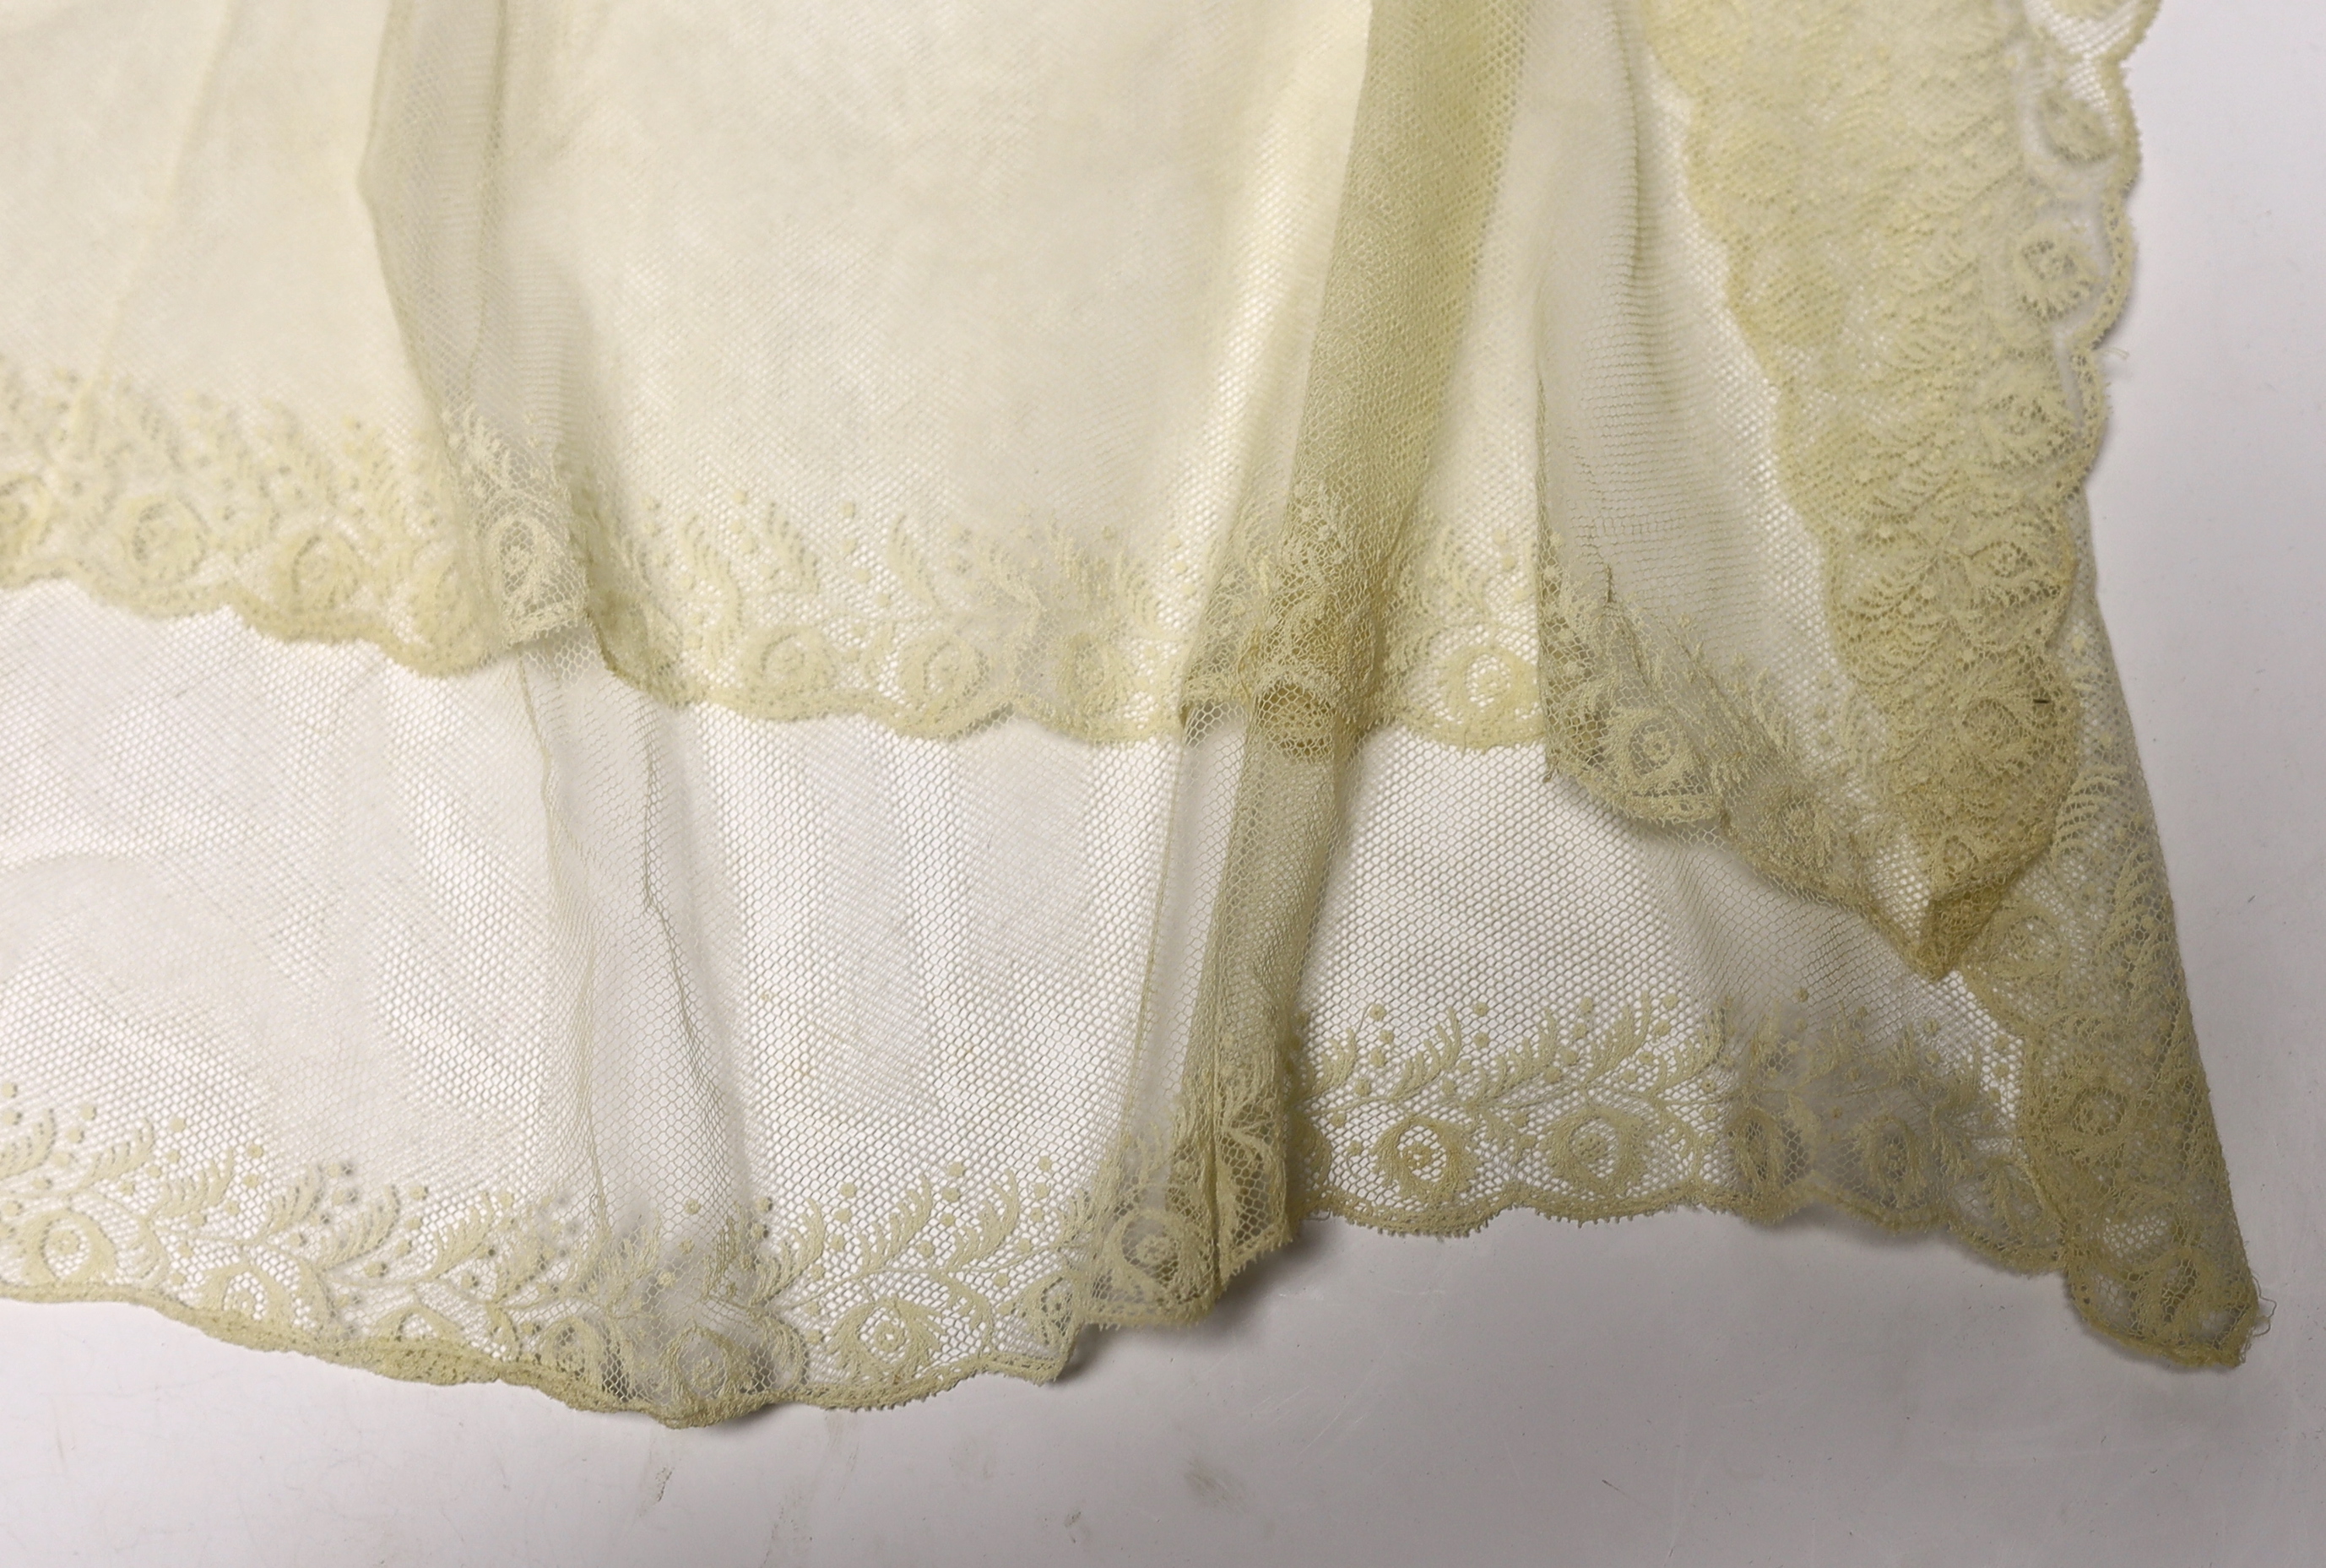 A long 19th century mixed Brussels lace collar, with 20 needle lace oval insertions, a similar wider Honiton bobbin lace collar and a machine lace bonnet veil